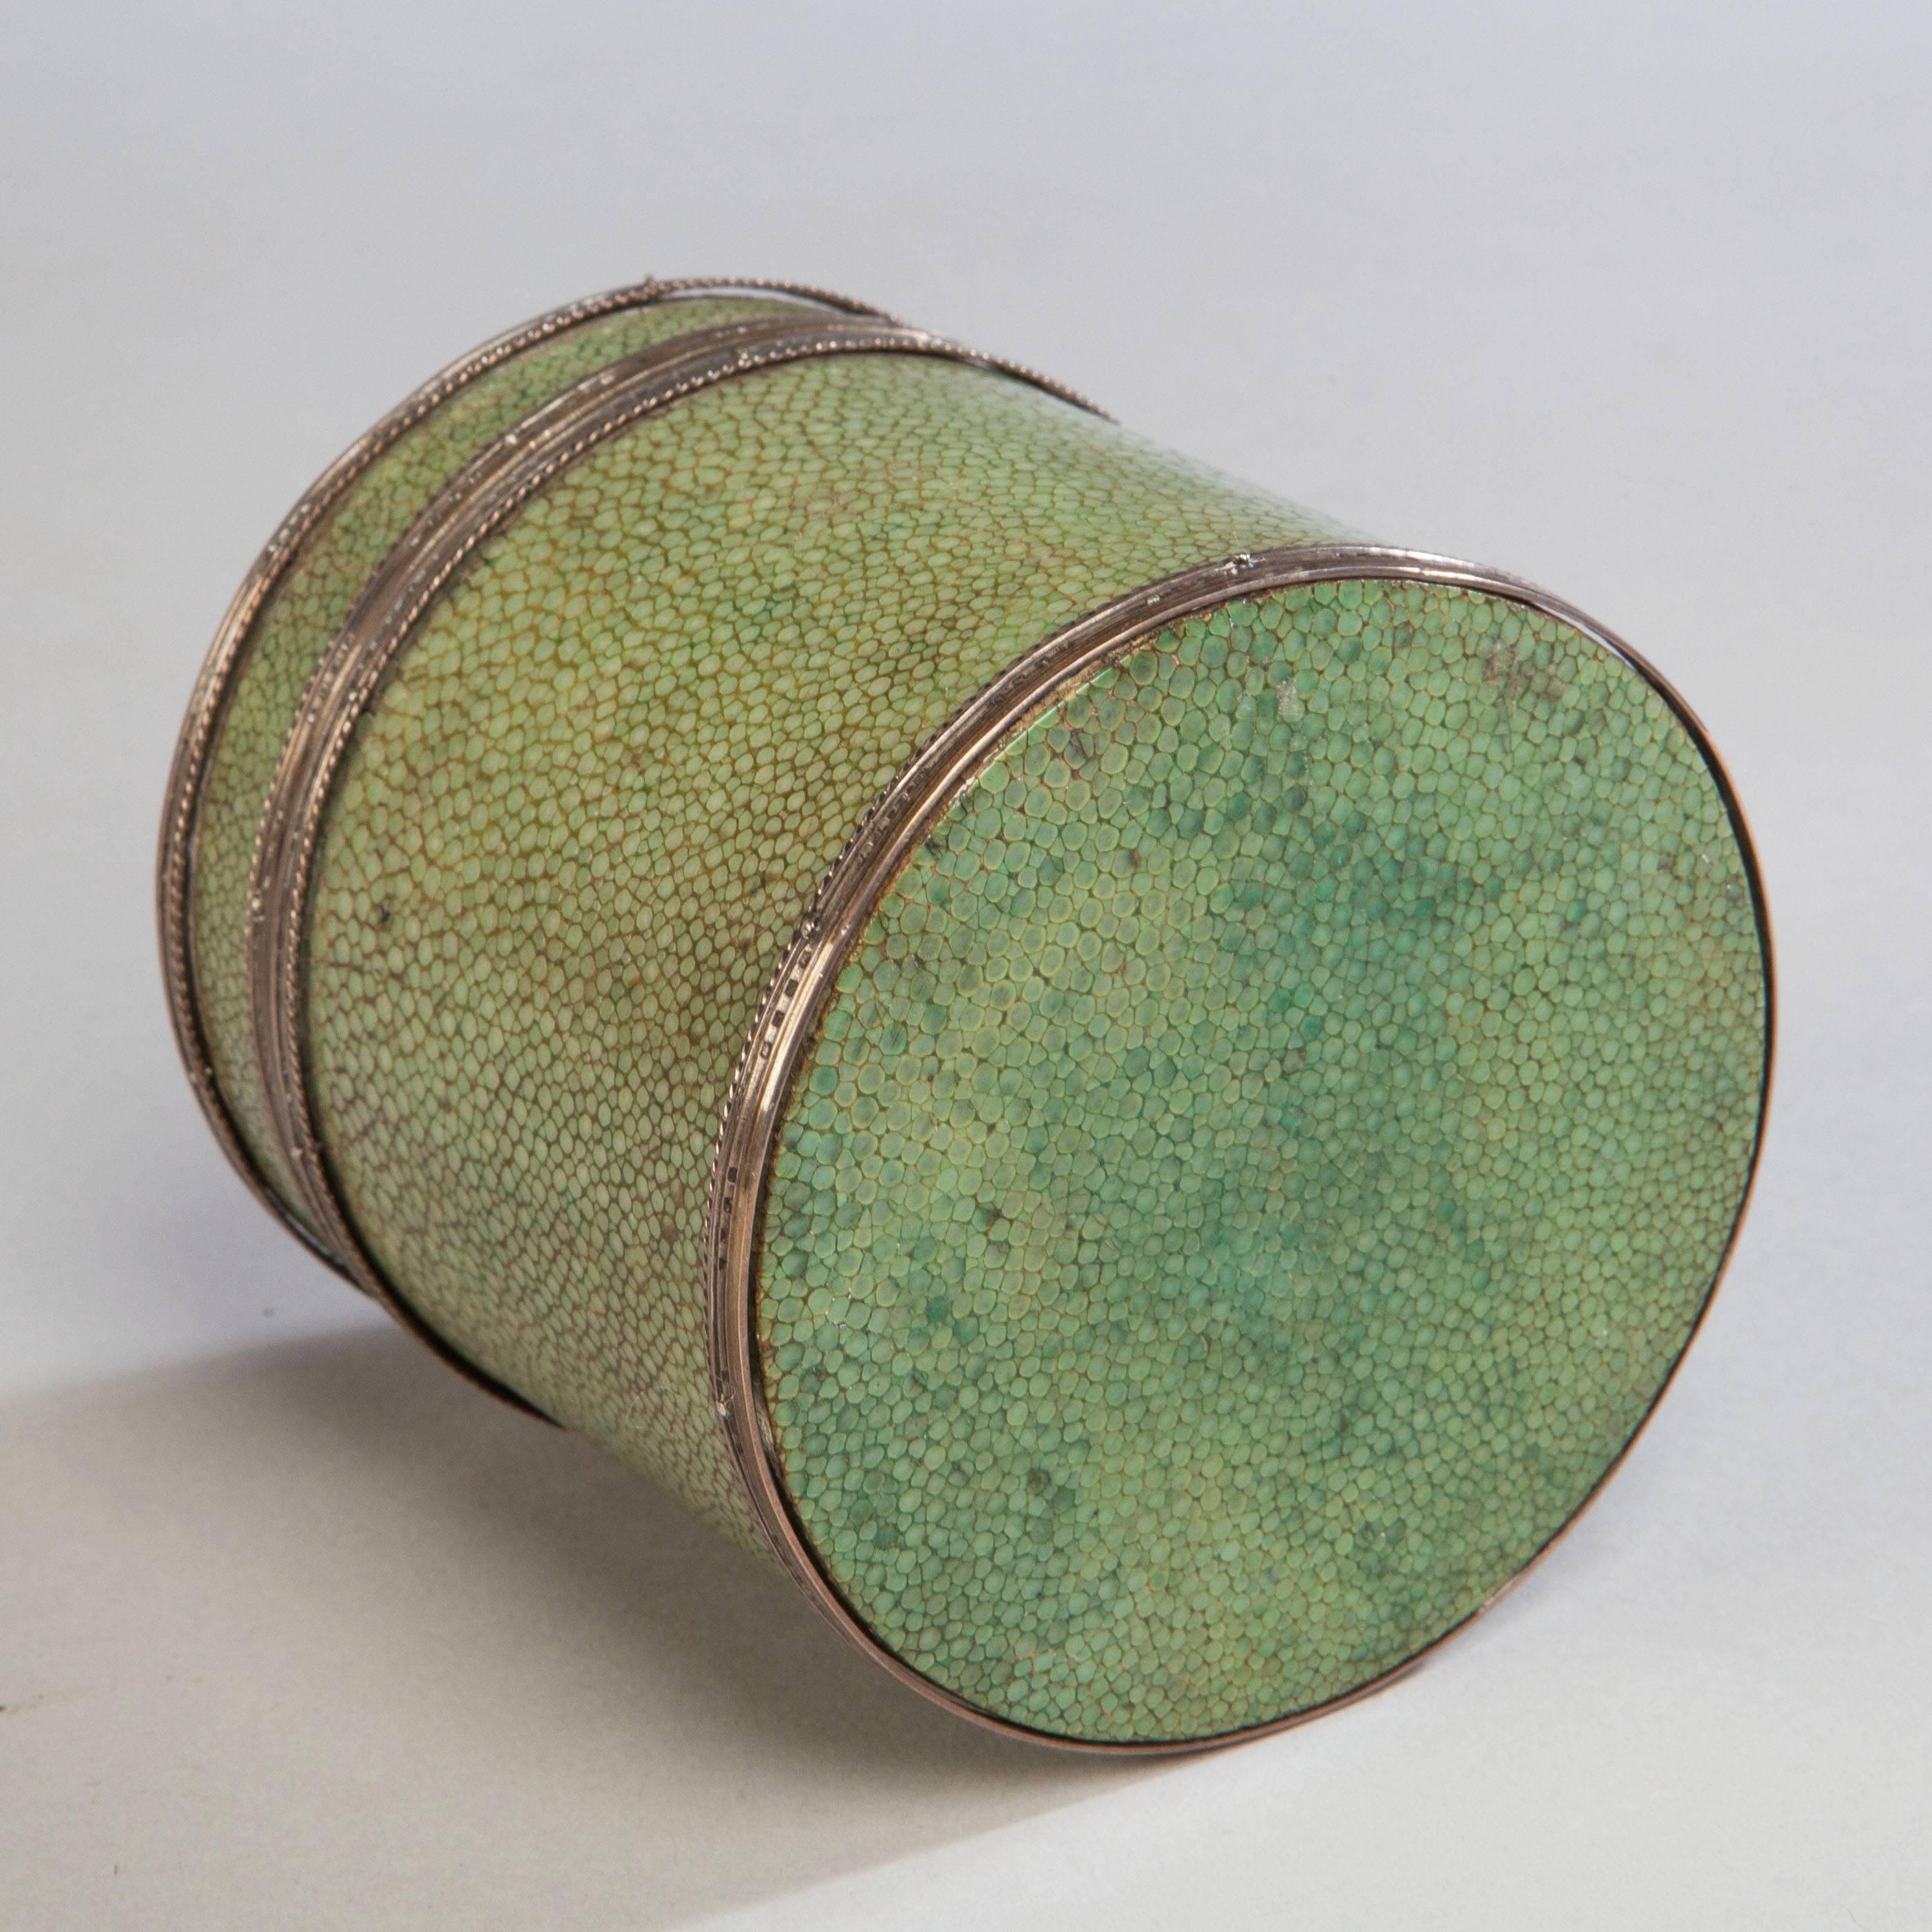 A fine circular wooden box with domed lid, wrapped throughout with shagreen and mounted with silver. The inside lid retaining the J Paul Cooper stamp.

Literature: John Paul Cooper (3 October 1861 – 3 May 1933) was an architect and a leading